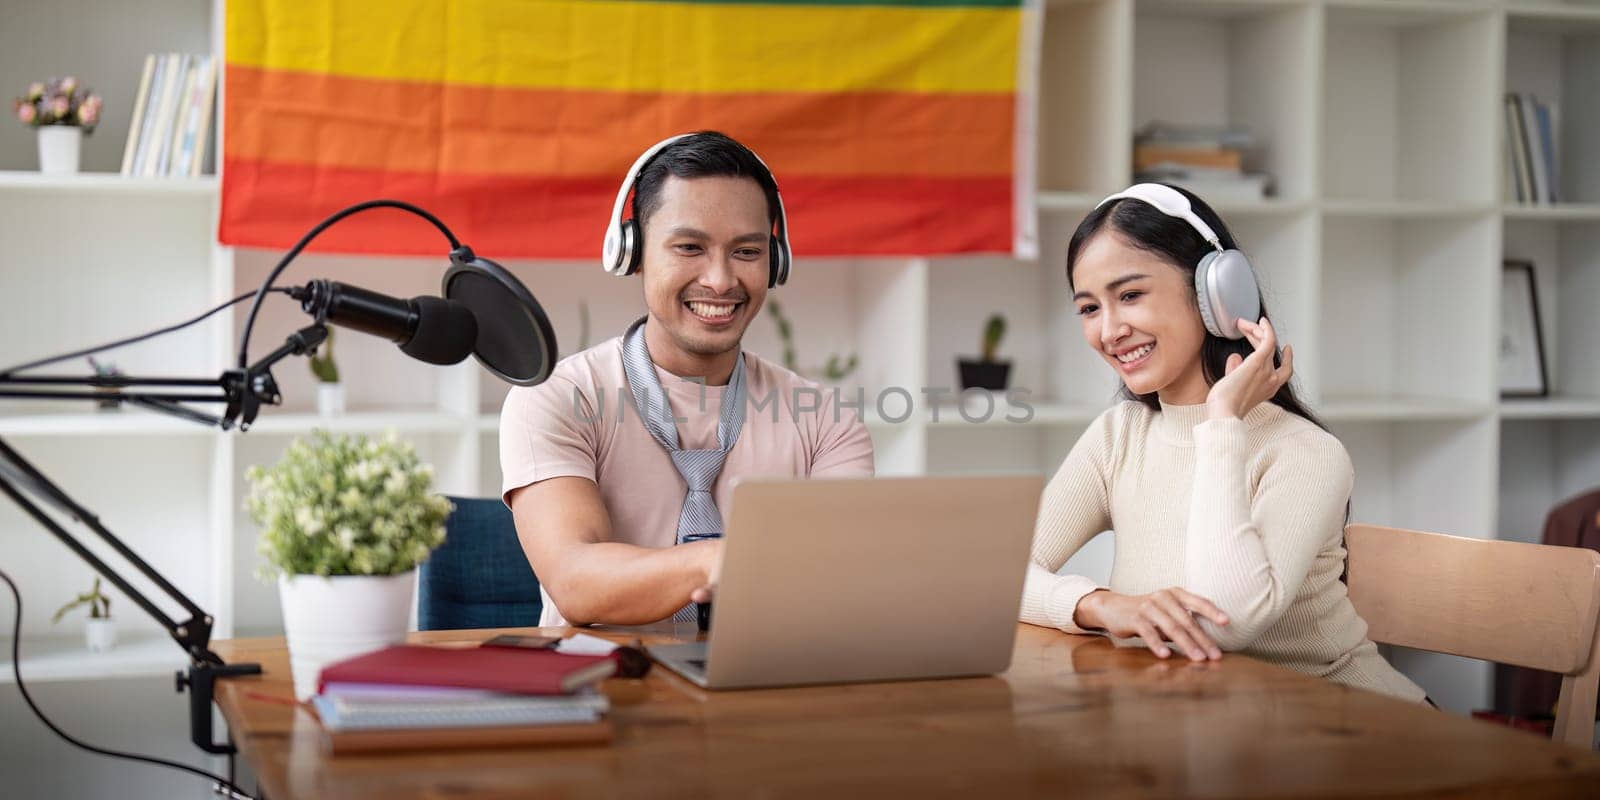 Asian gay radio host enjoy chatting while record an audio podcast with female friend.